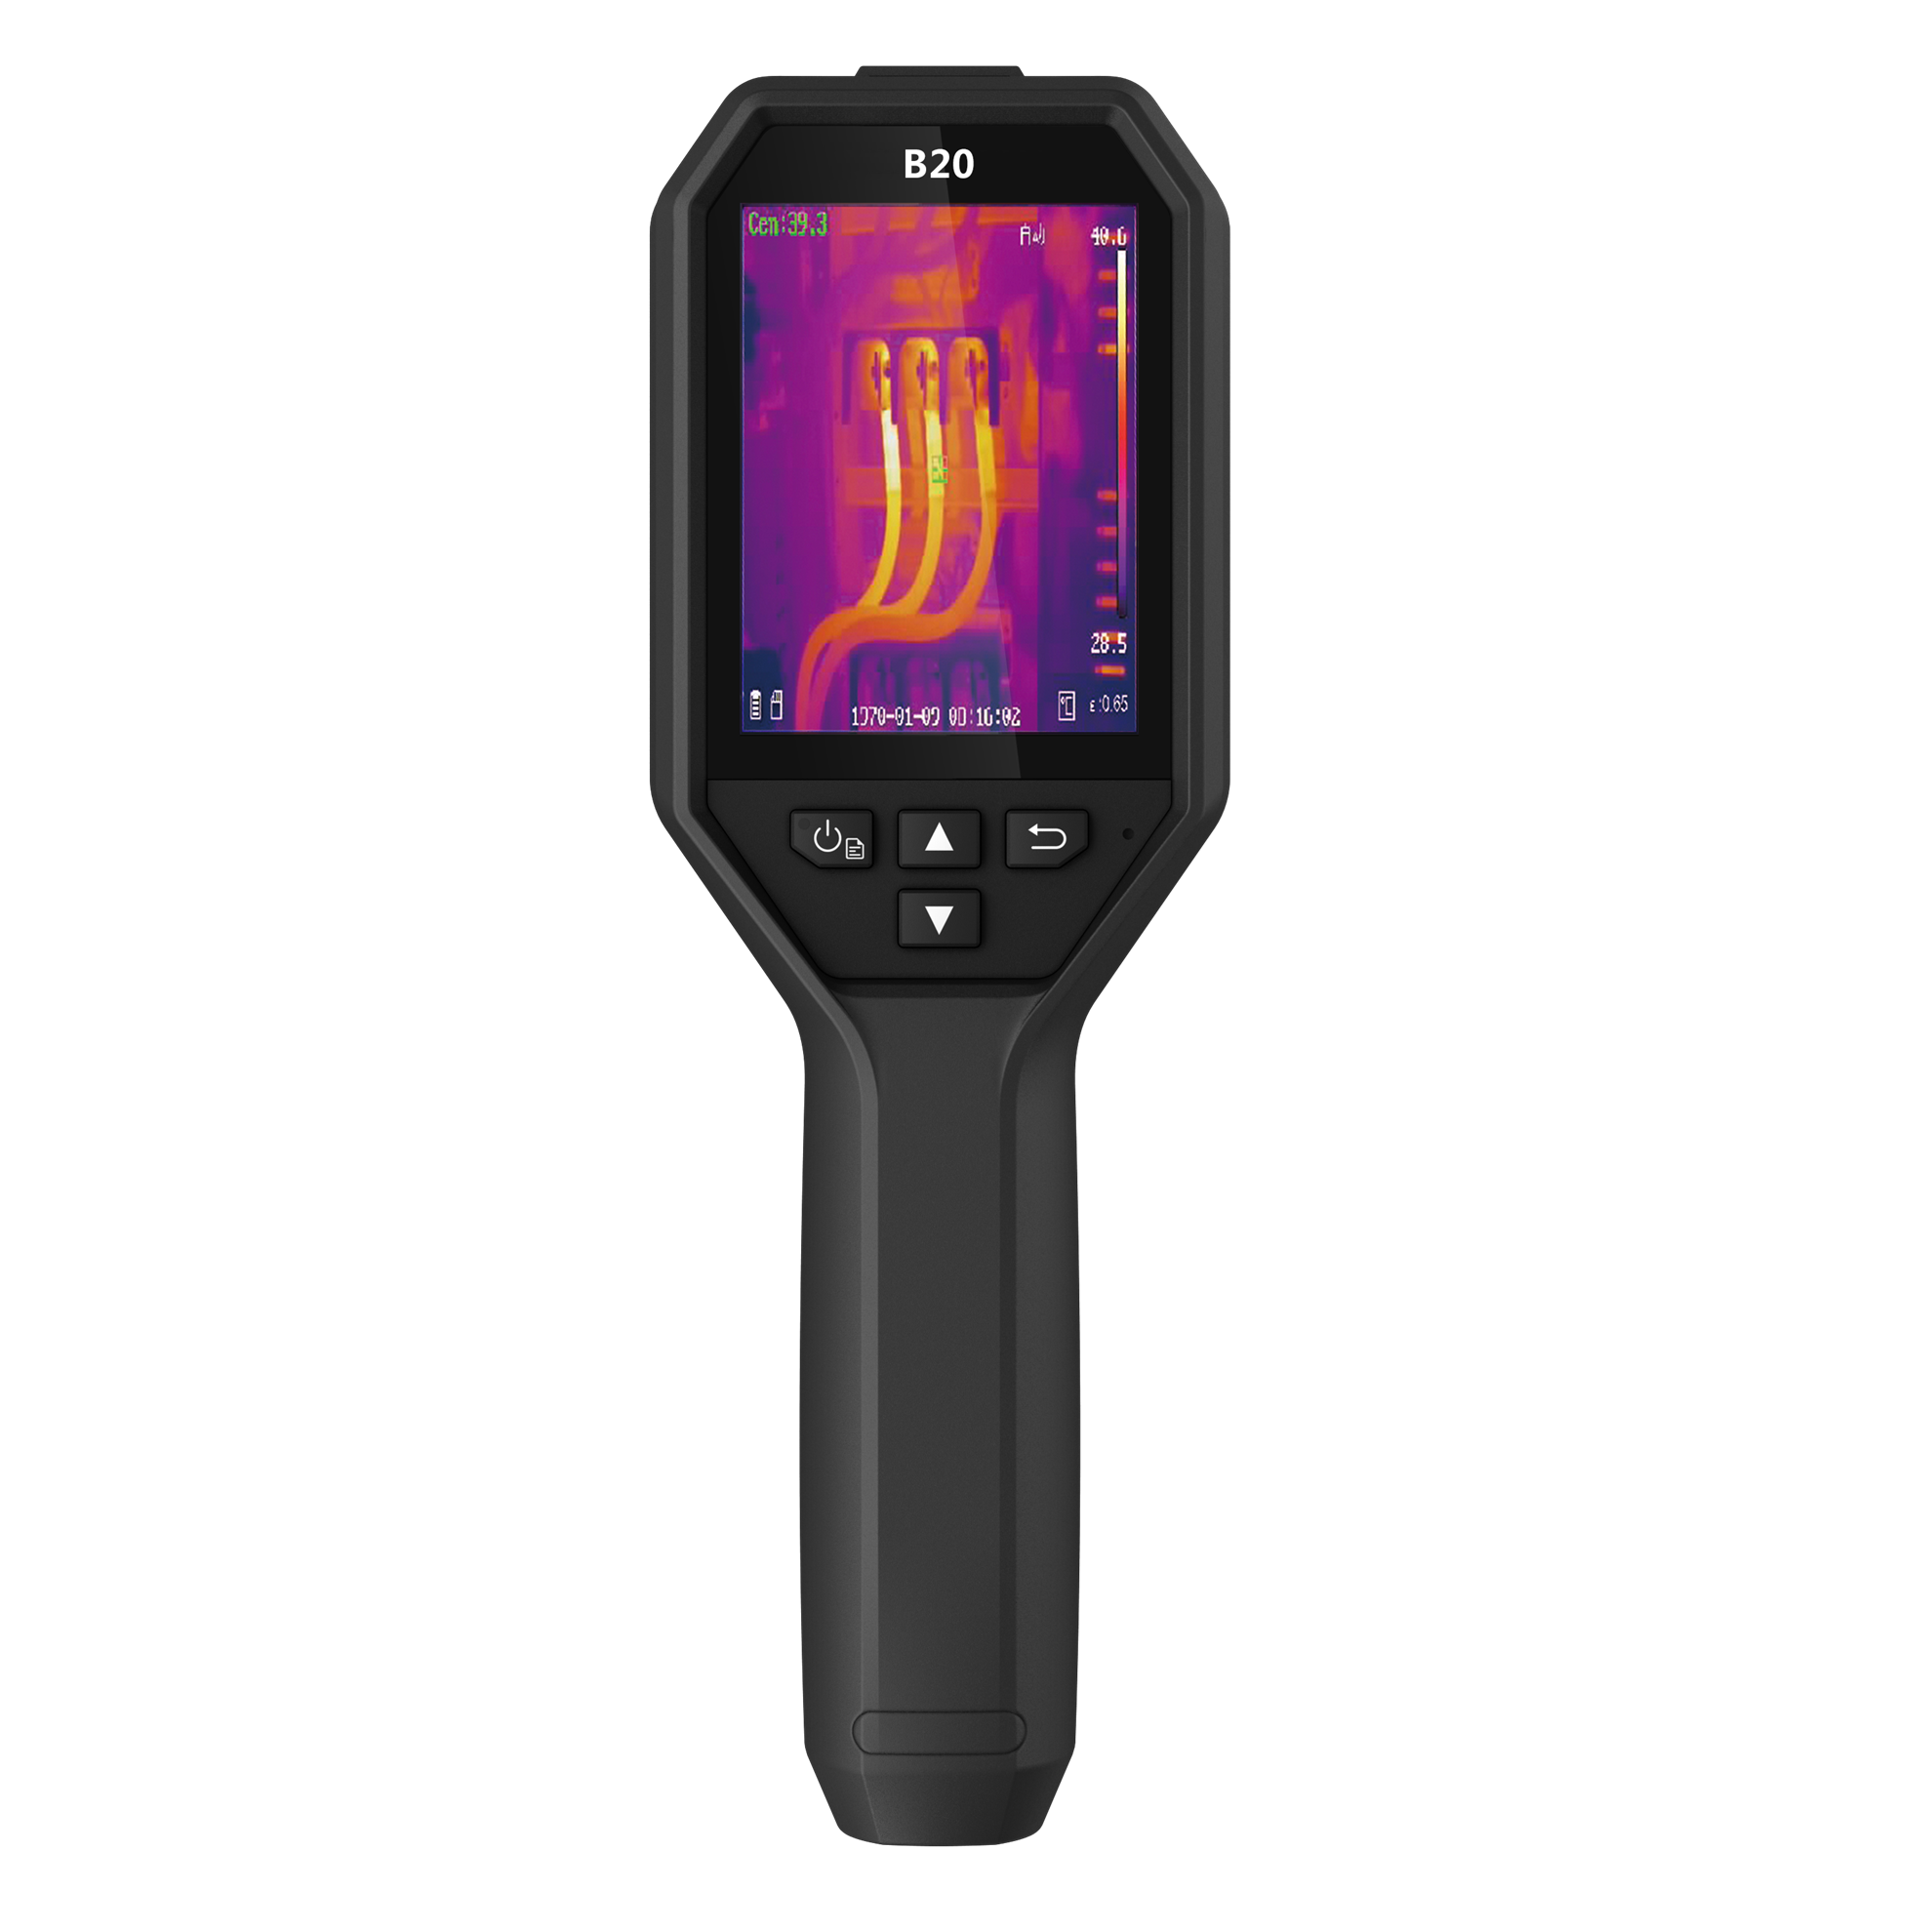 hikmicro b20 compact hand held wi-fi thermal imaging camera. tech supply shed